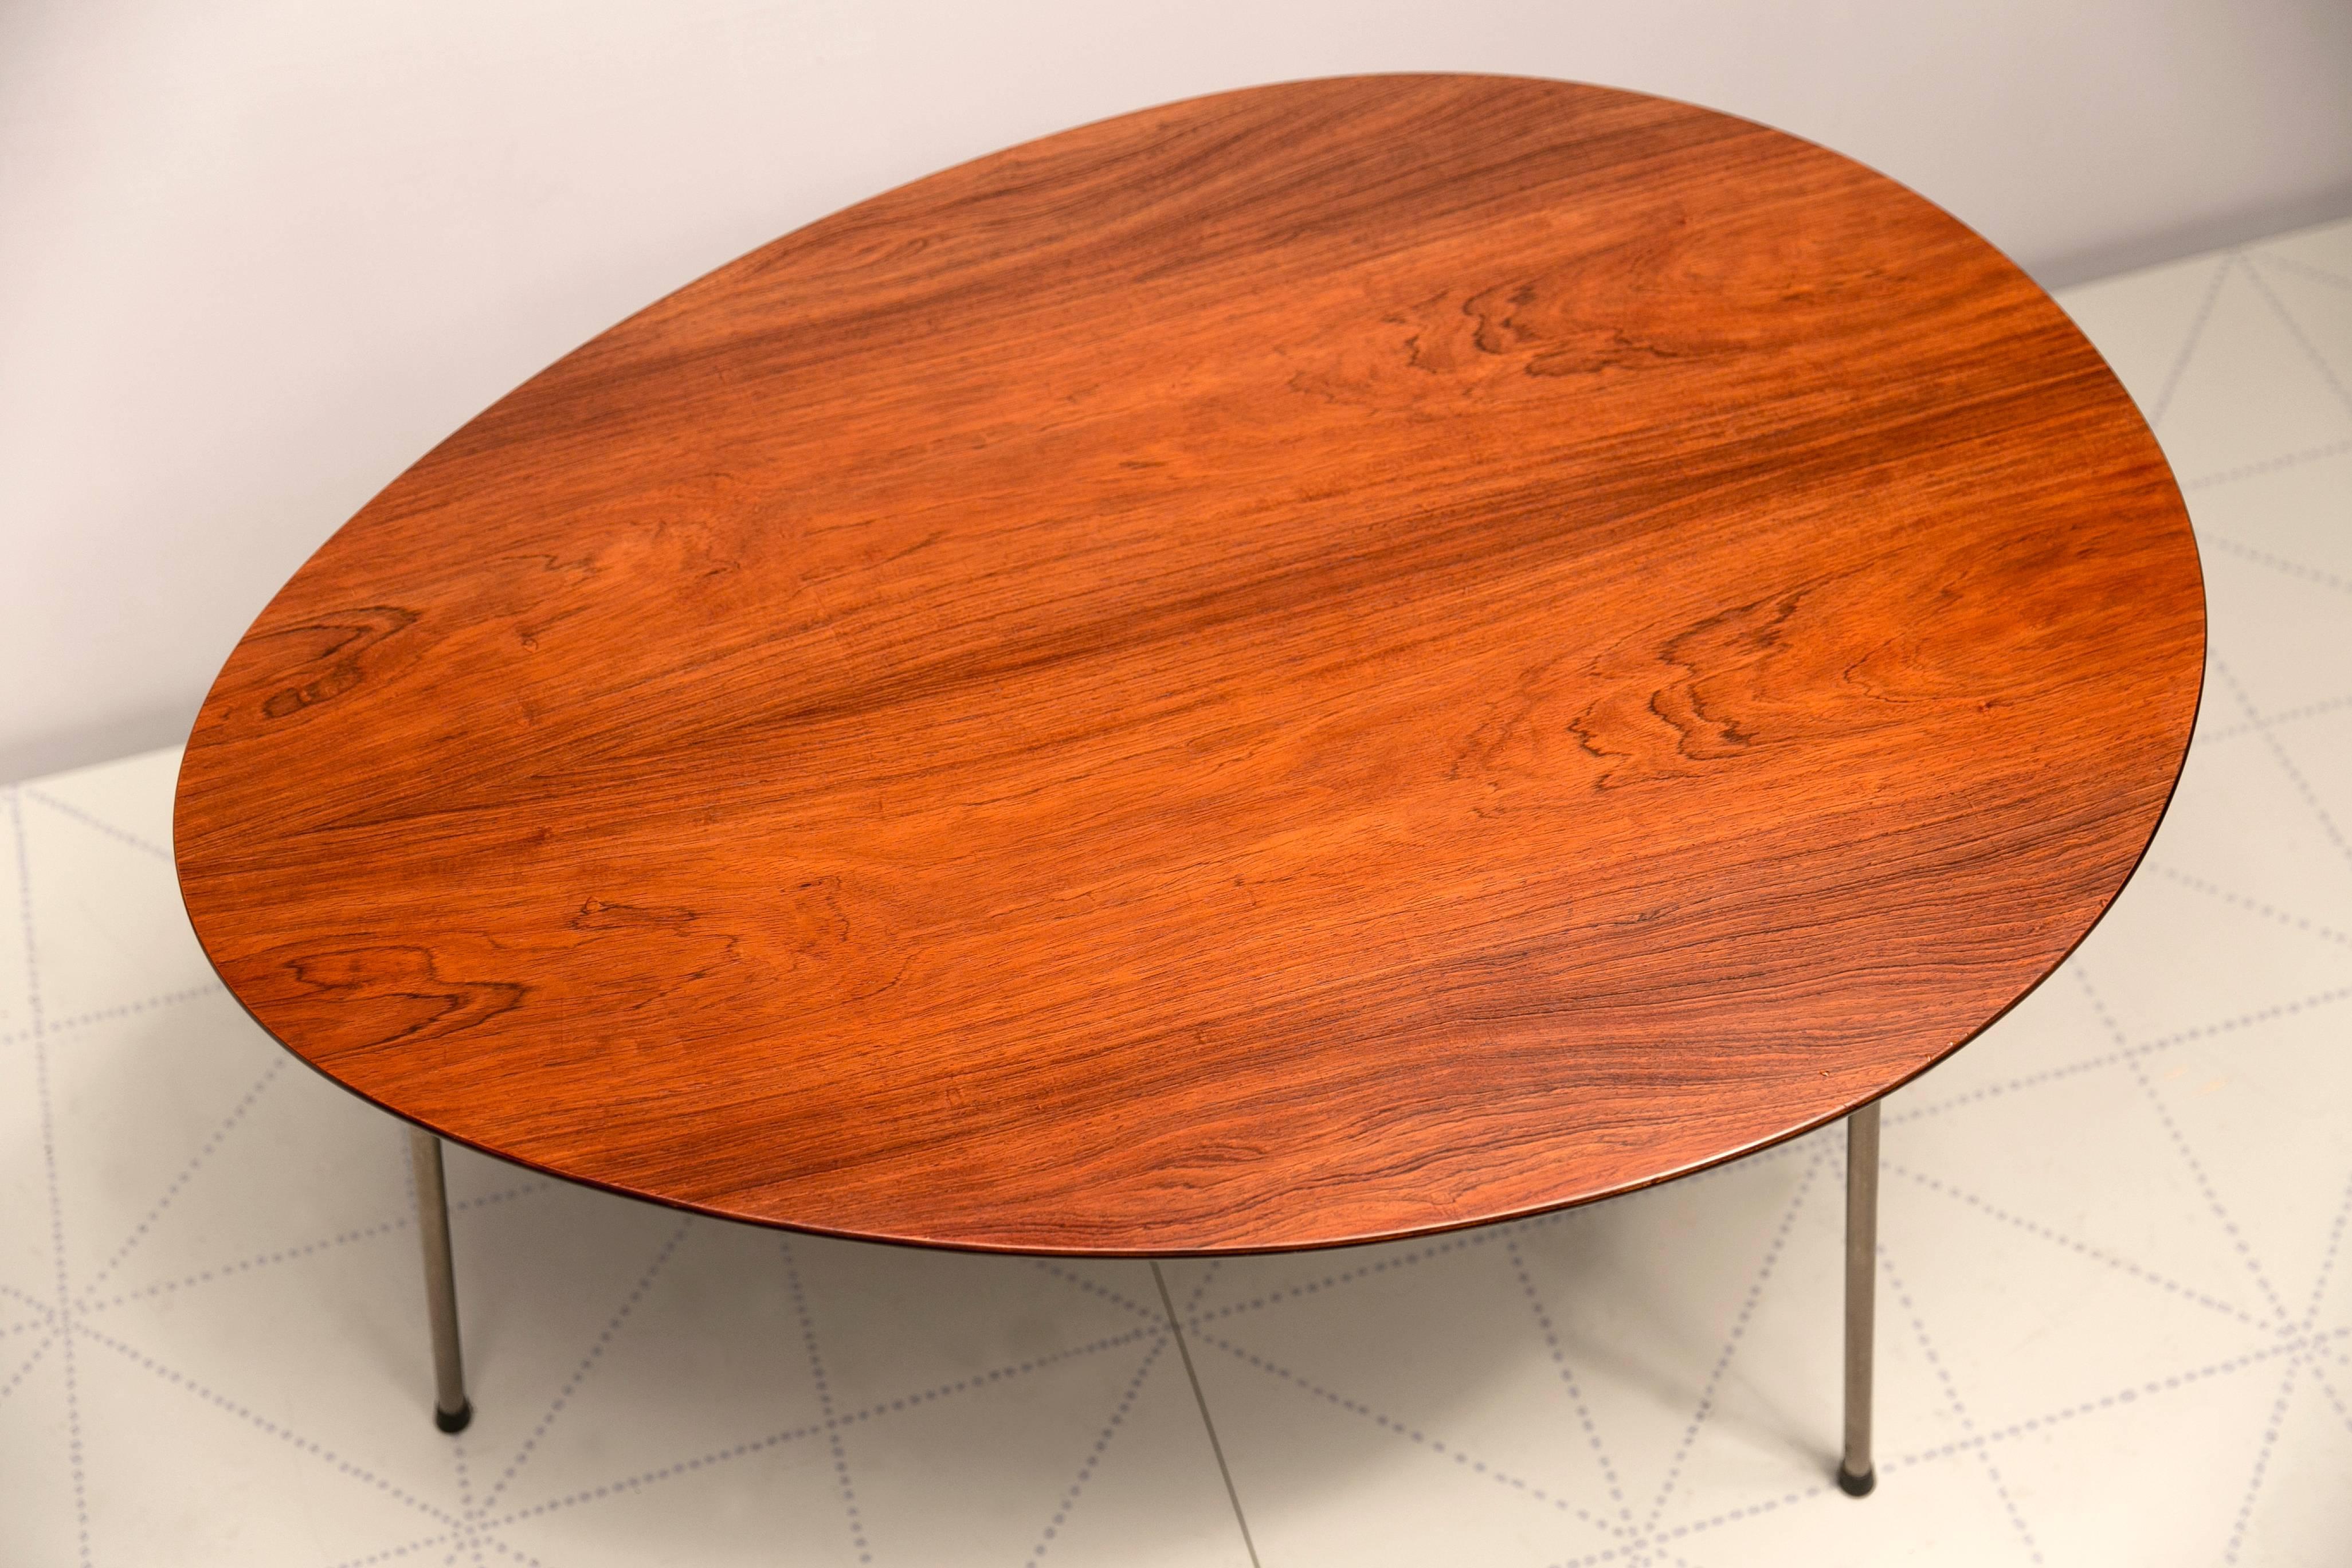 Exceptional Early Brazilian Rosewood Egg Table and Ant Chairs by Arne Jacobsen  (Skandinavische Moderne) im Angebot